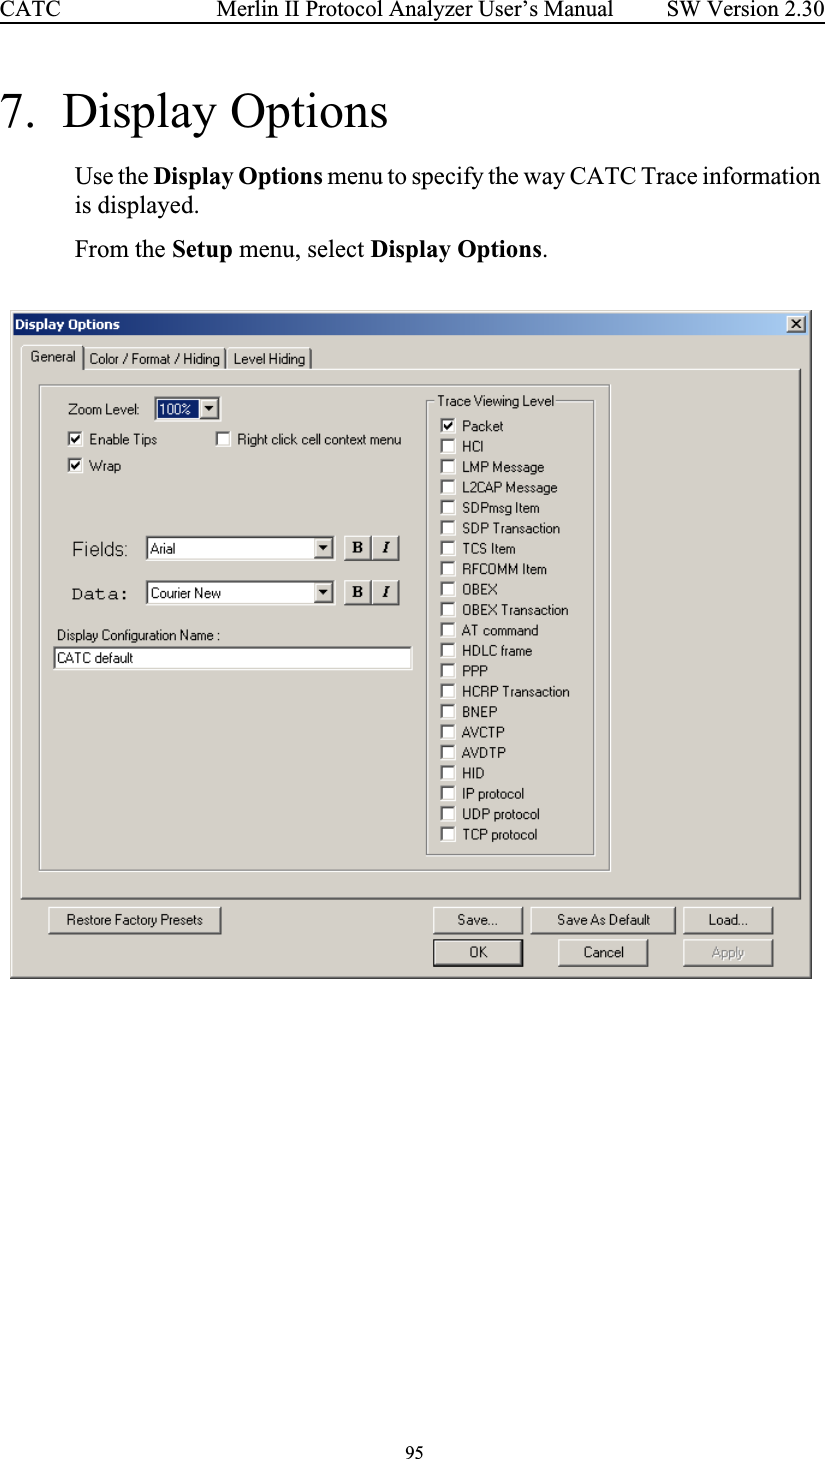  95 Merlin II Protocol Analyzer User’s ManualCATC SW Version 2.307.  Display OptionsUse the Display Options menu to specify the way CATC Trace information is displayed.From the Setup menu, select Display Options.